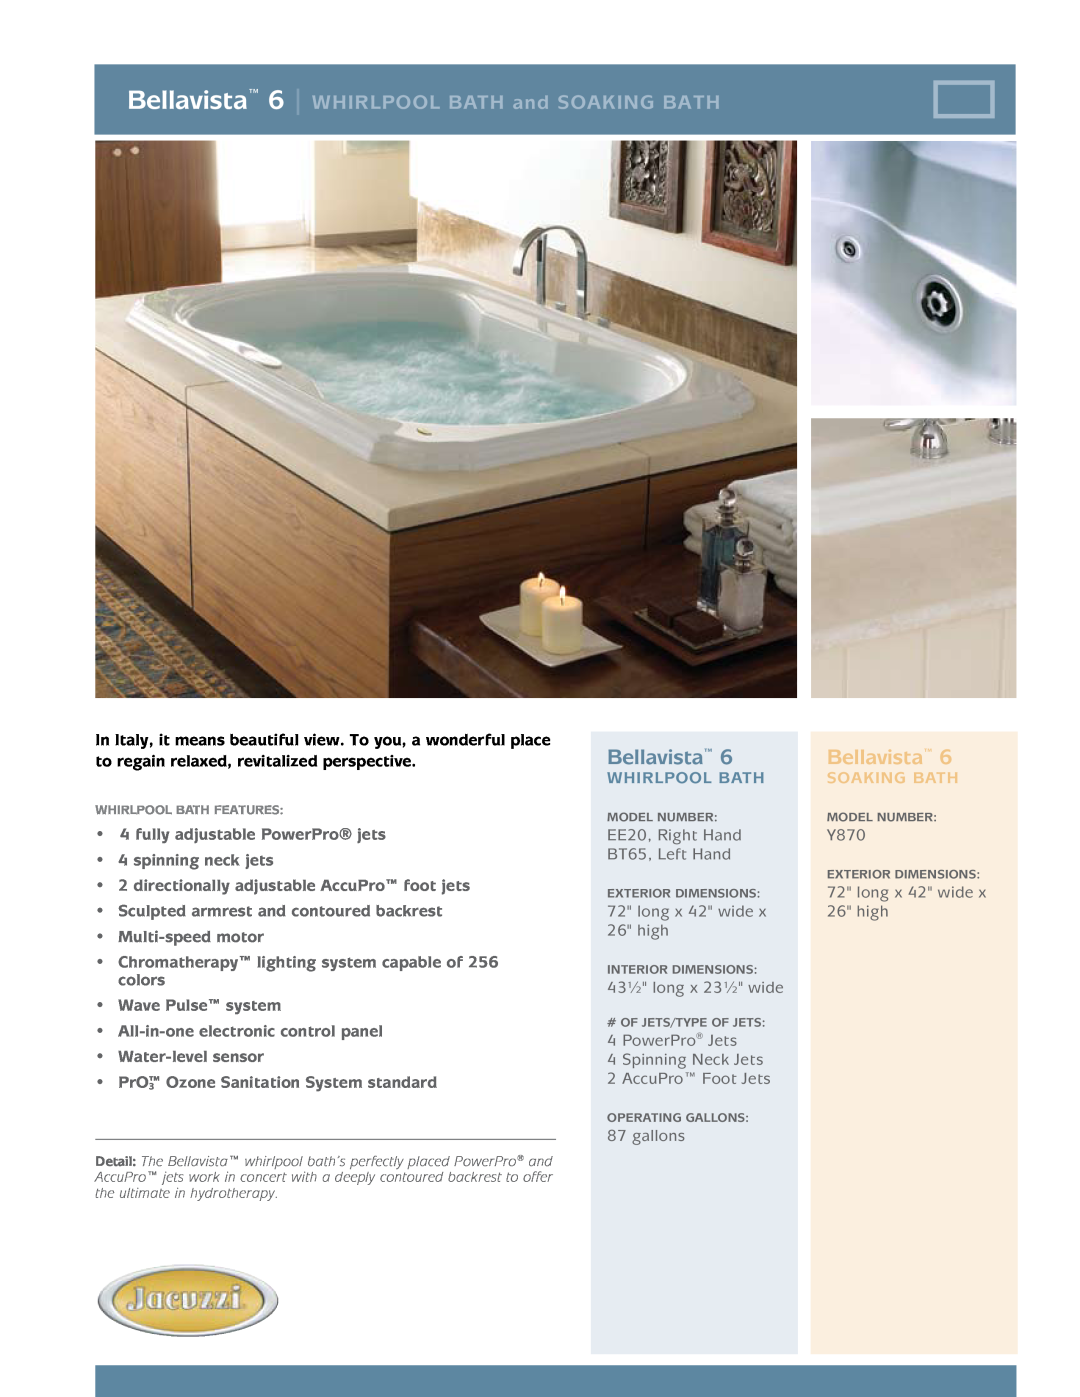 Jacuzzi dimensions EE20, Right Hand BT65, Left Hand, long x 42 wide x 26 high, Y870, 43½ long x 23½ wide, gallons 